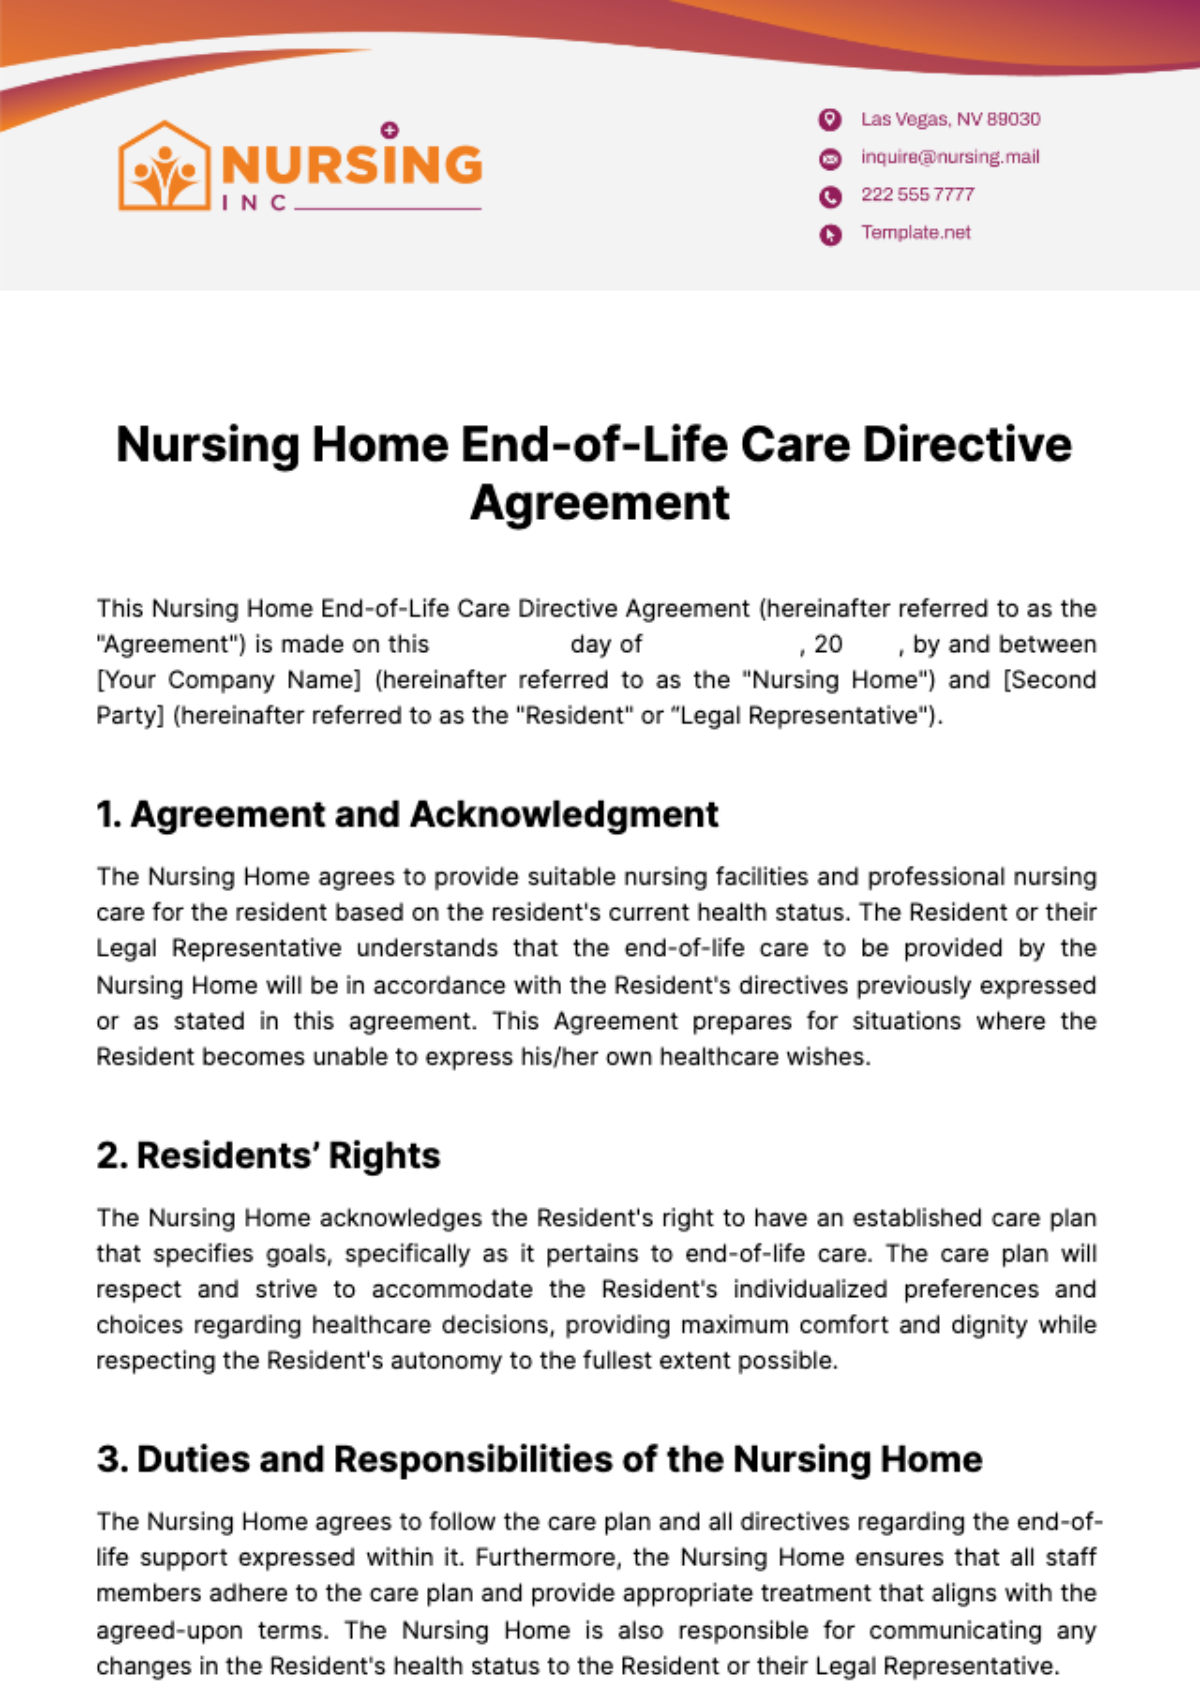 Free Nursing Home End-of-Life Care Directive Agreement Template